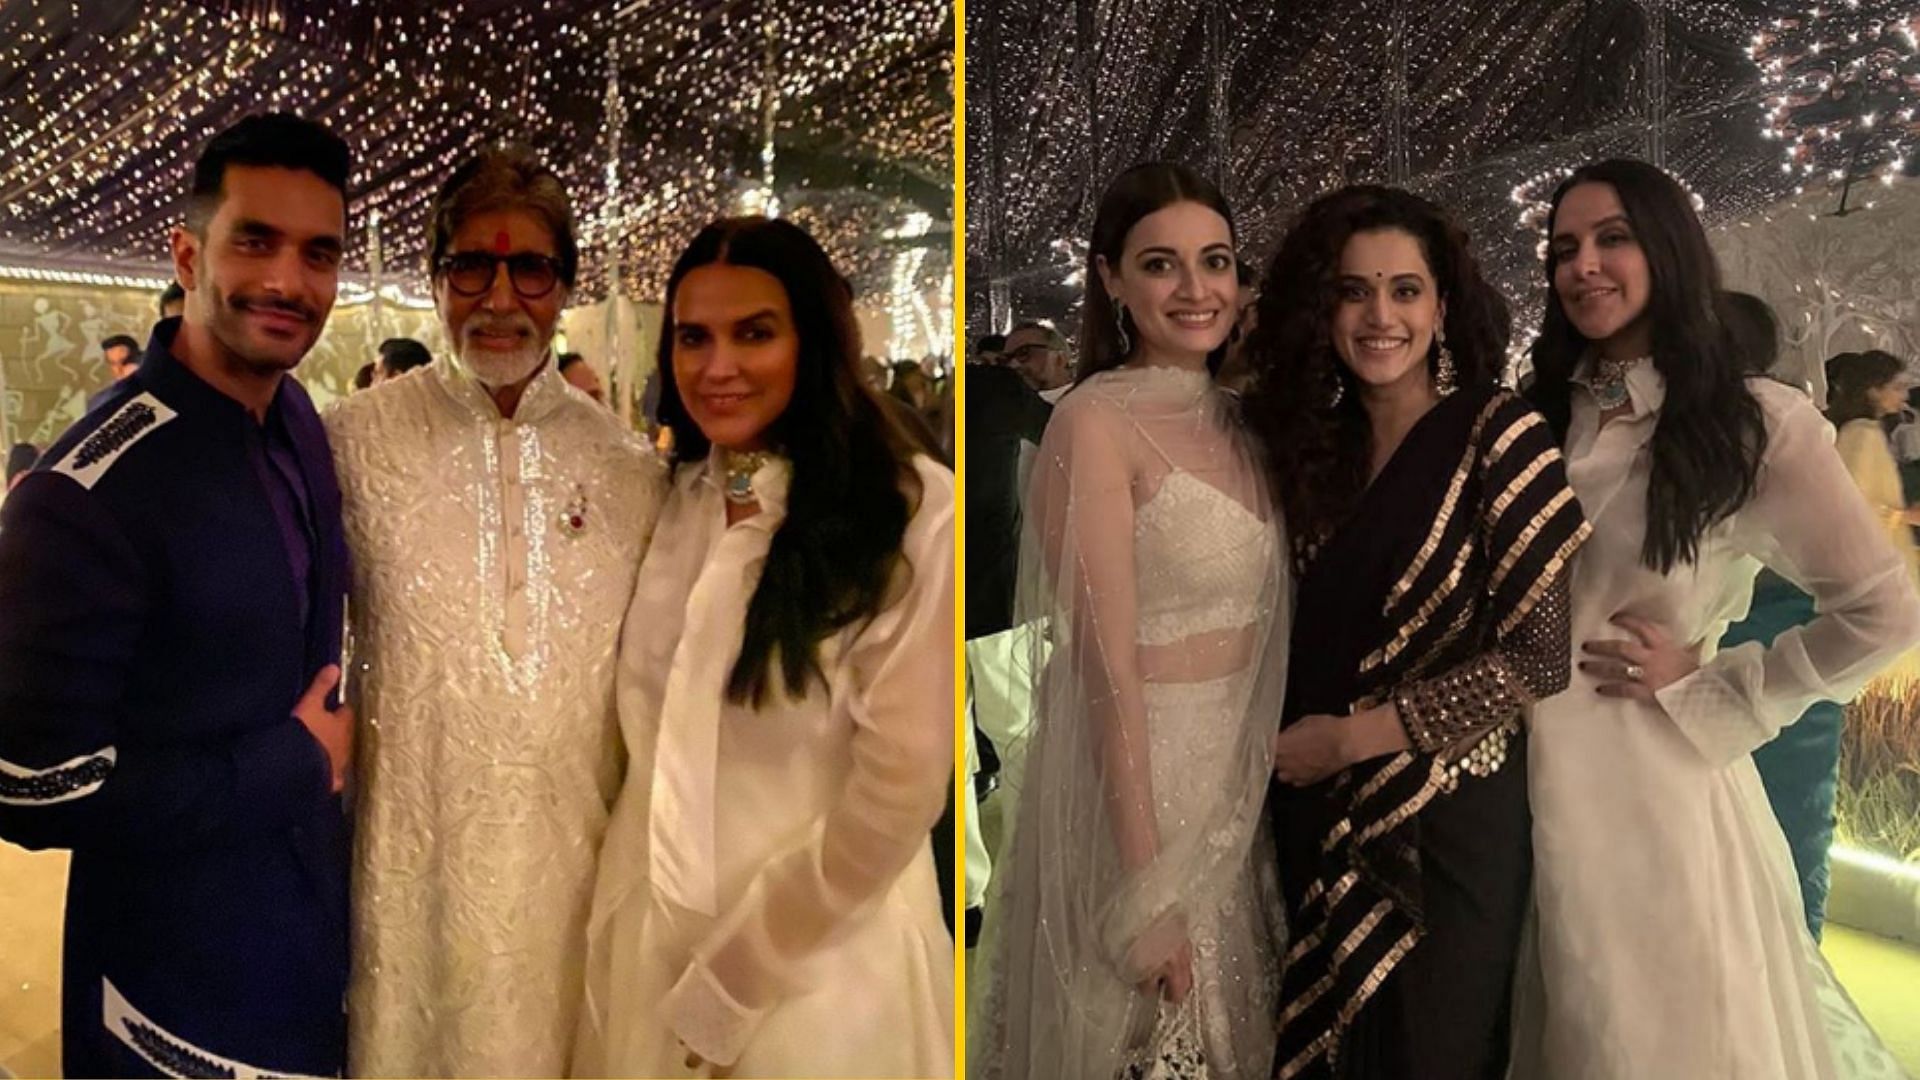 Neha Dhupia with Angad Bedi, Dia Mirza and Taapsee Pannu at the Bachchan’s Diwali party.